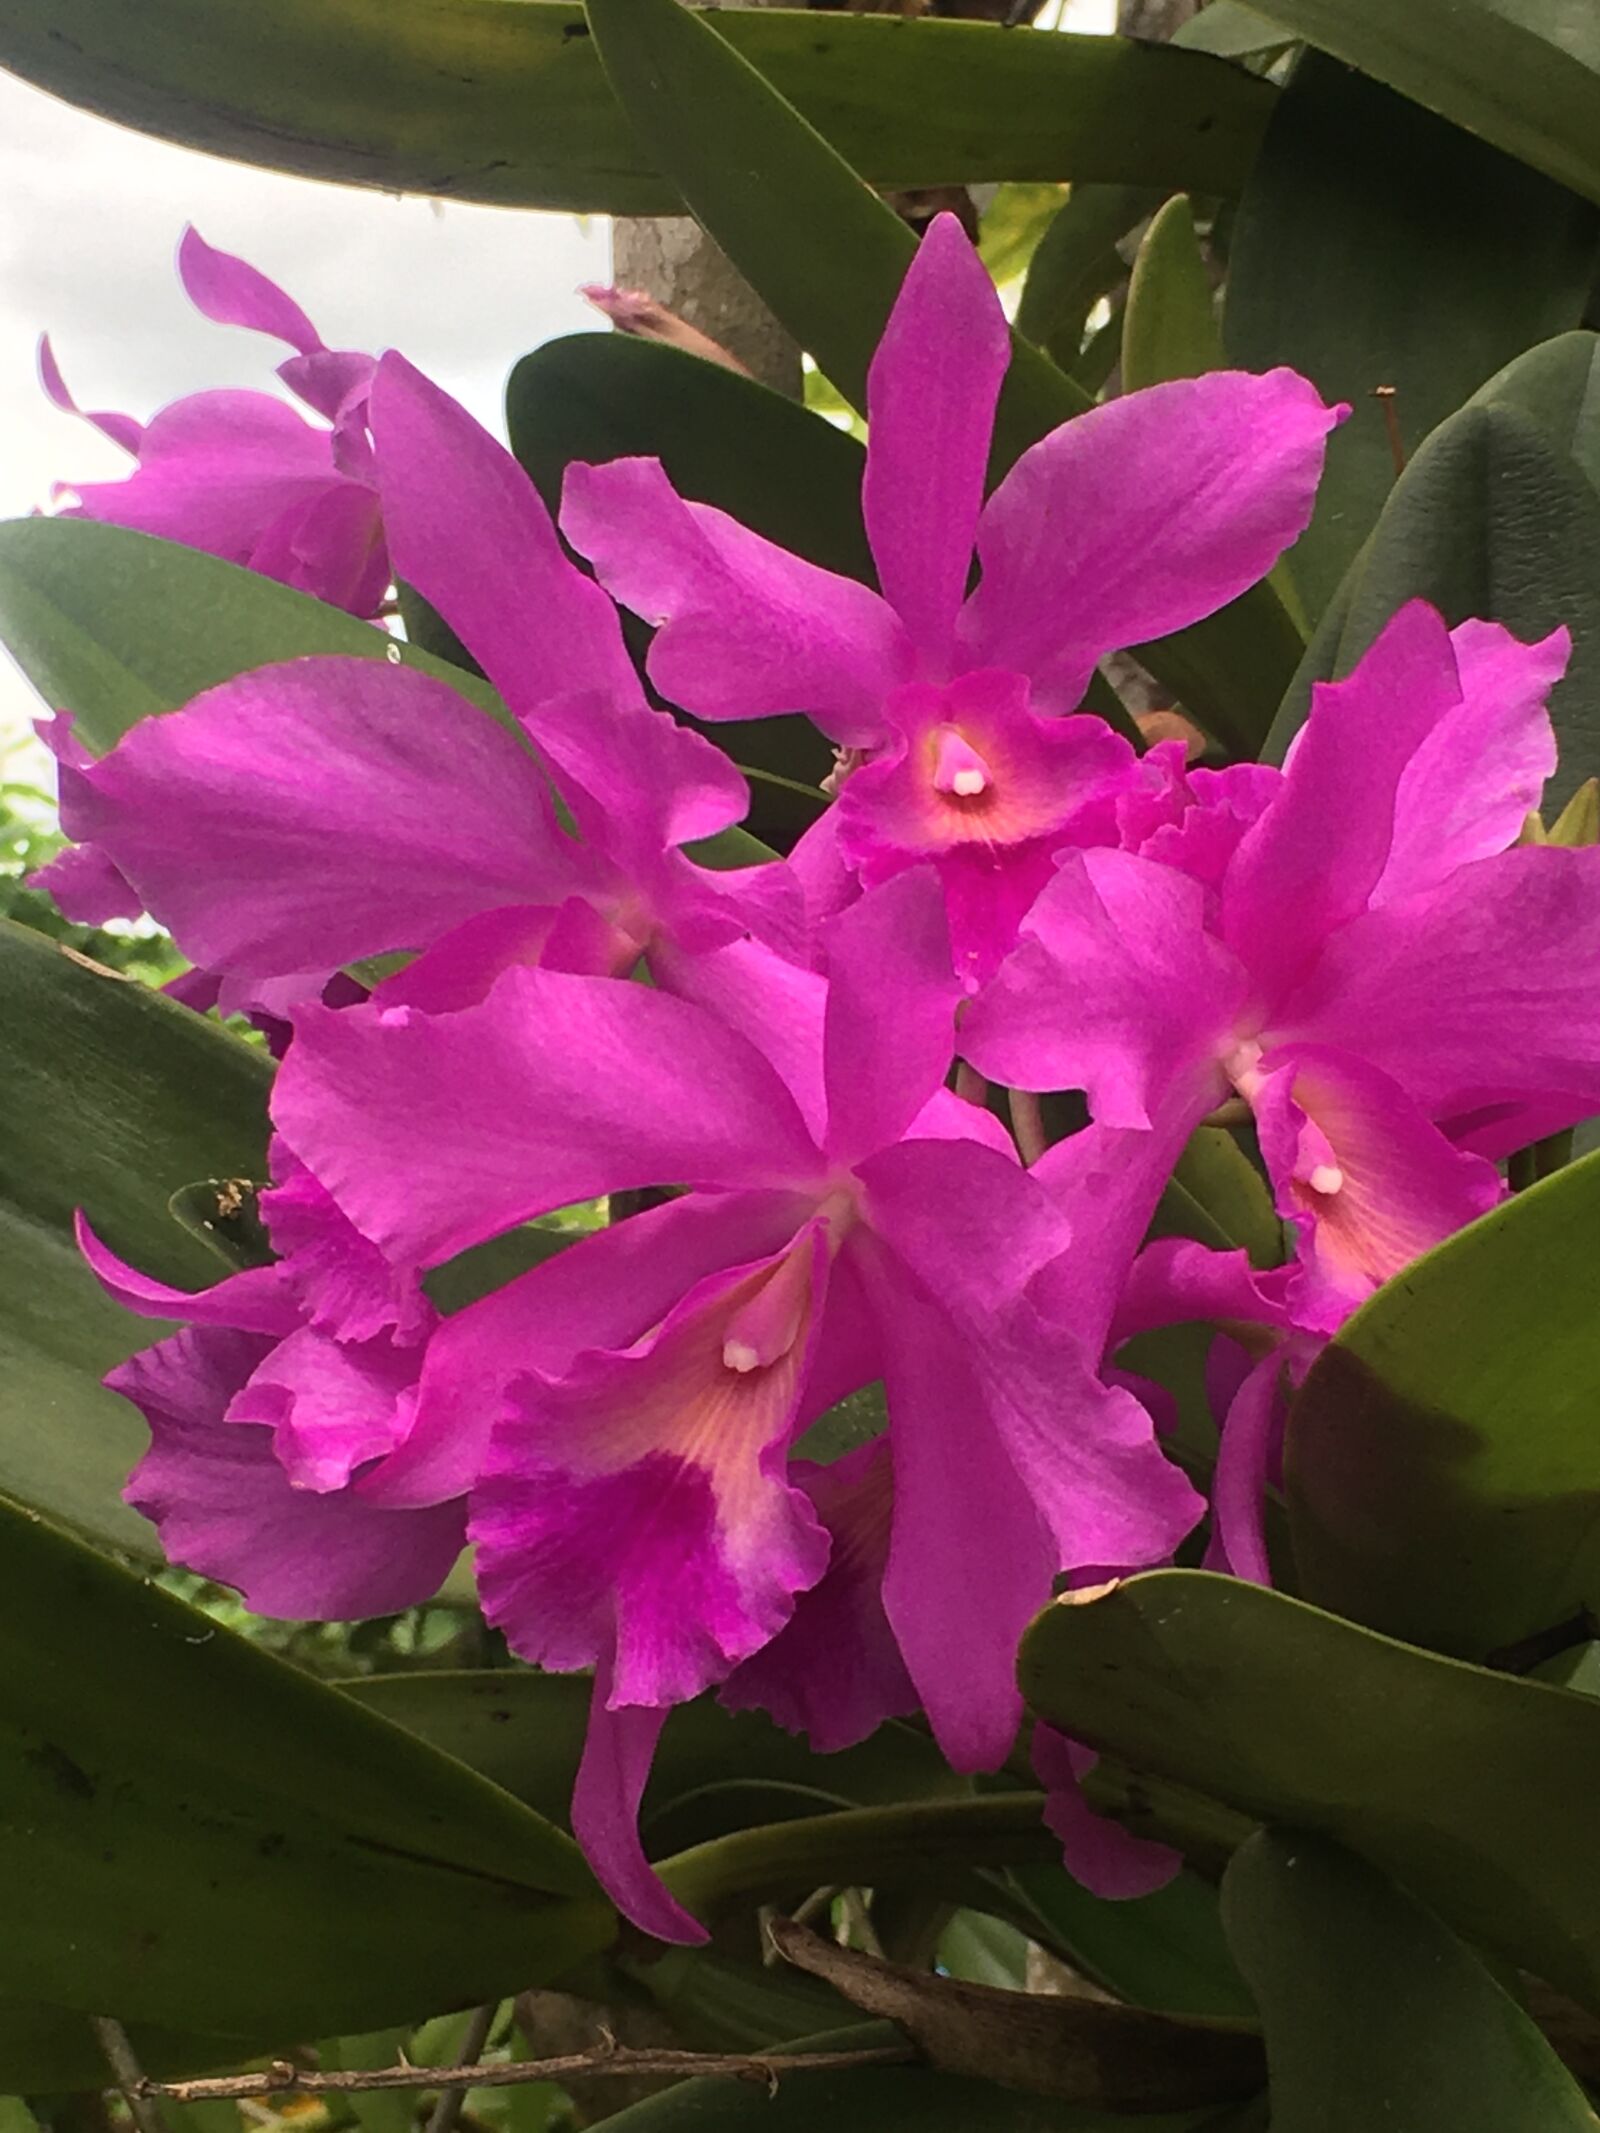 iPhone 6s Plus back camera 4.15mm f/2.2 sample photo. Vanda orchids, green leaves photography